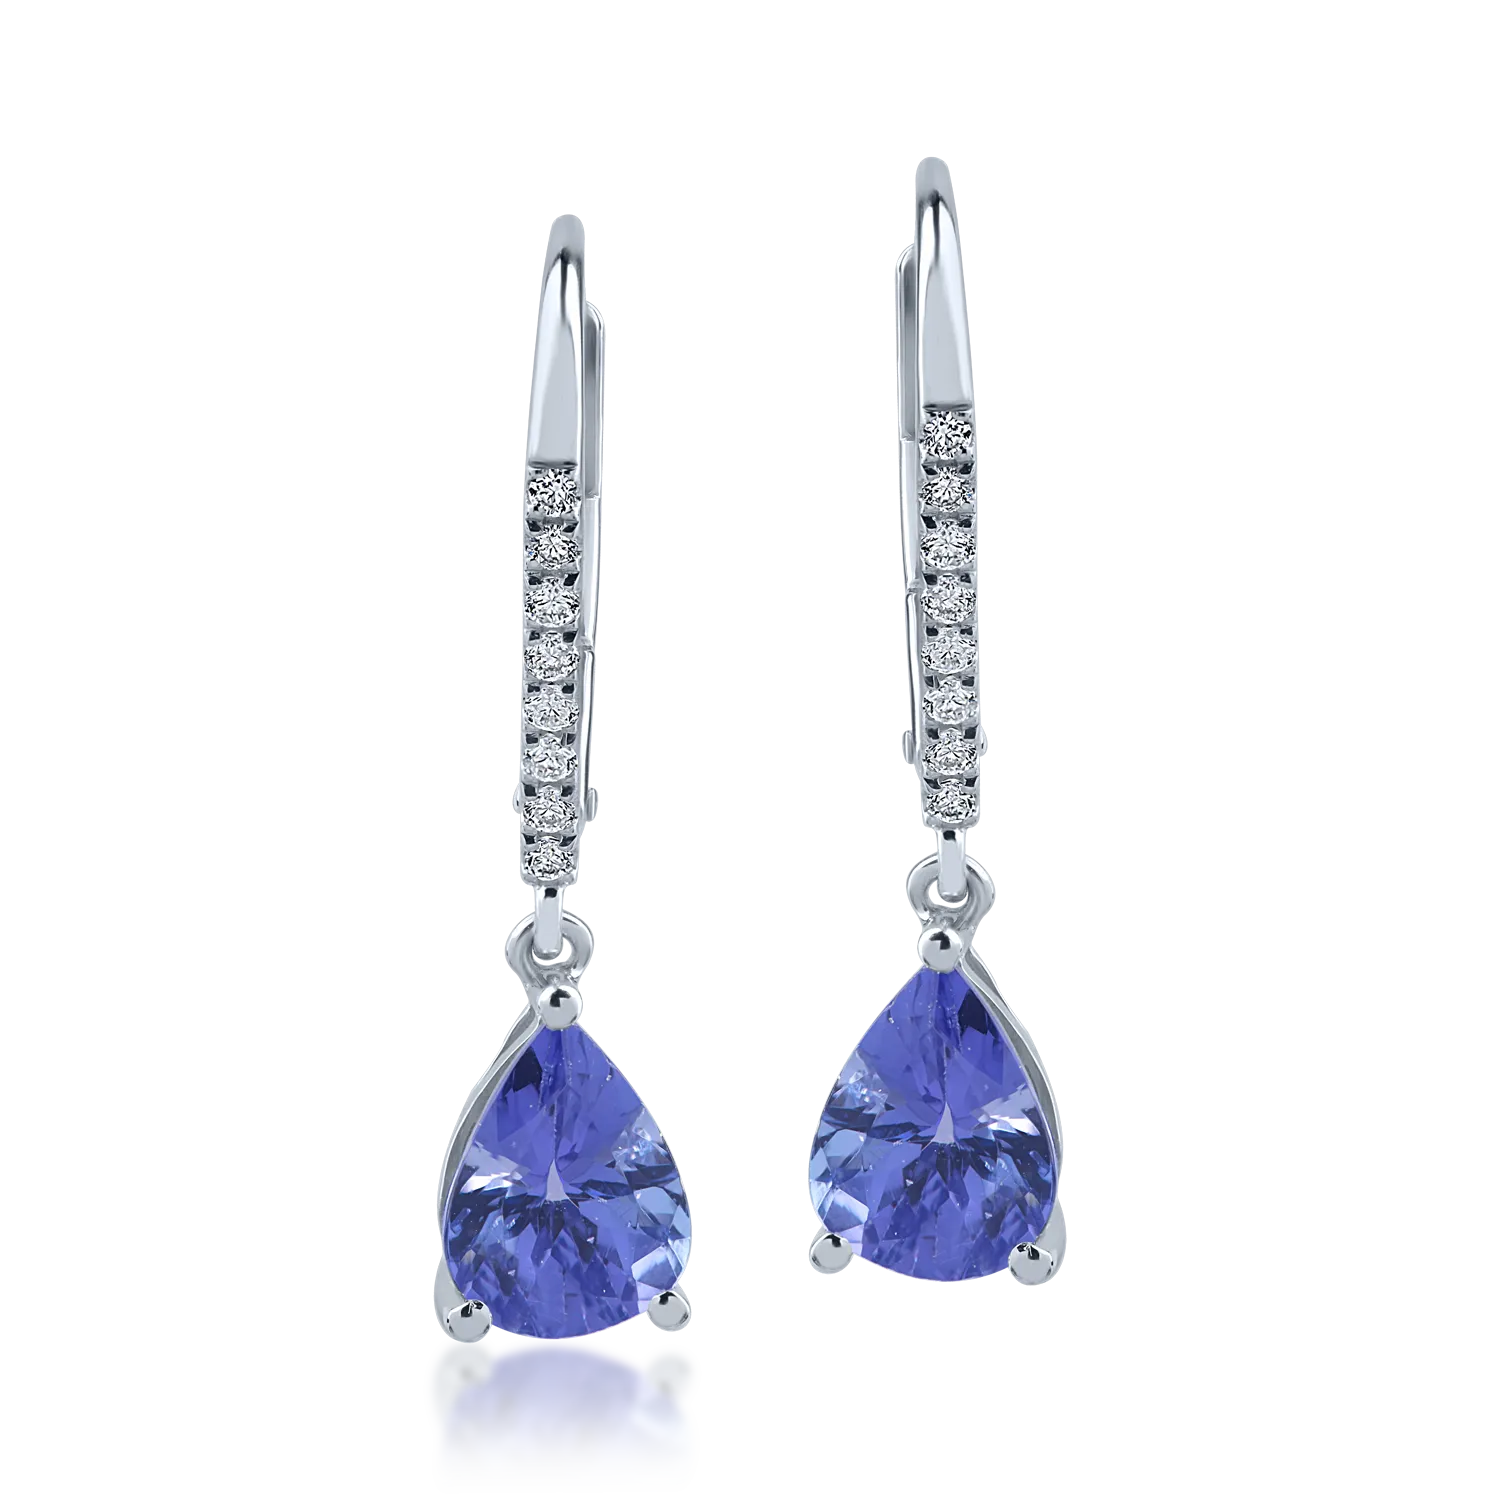 White gold earrings with 2.13ct tanzanites and 0.12ct diamonds